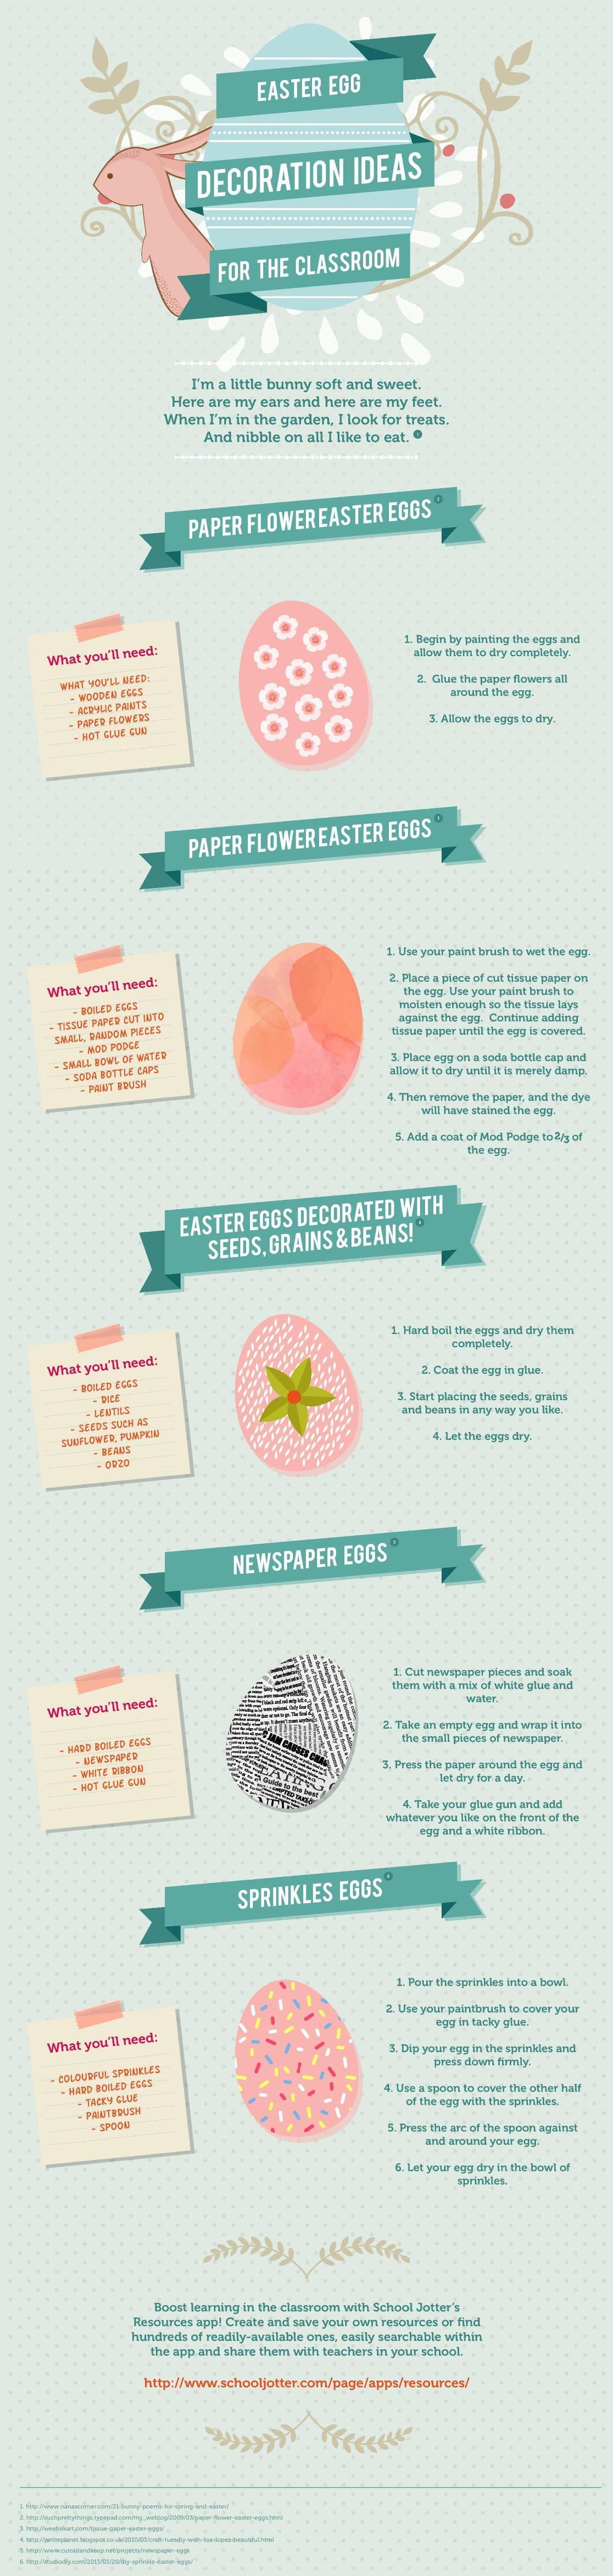 Easter Egg Decoration Ideas for the Classroom Infographic